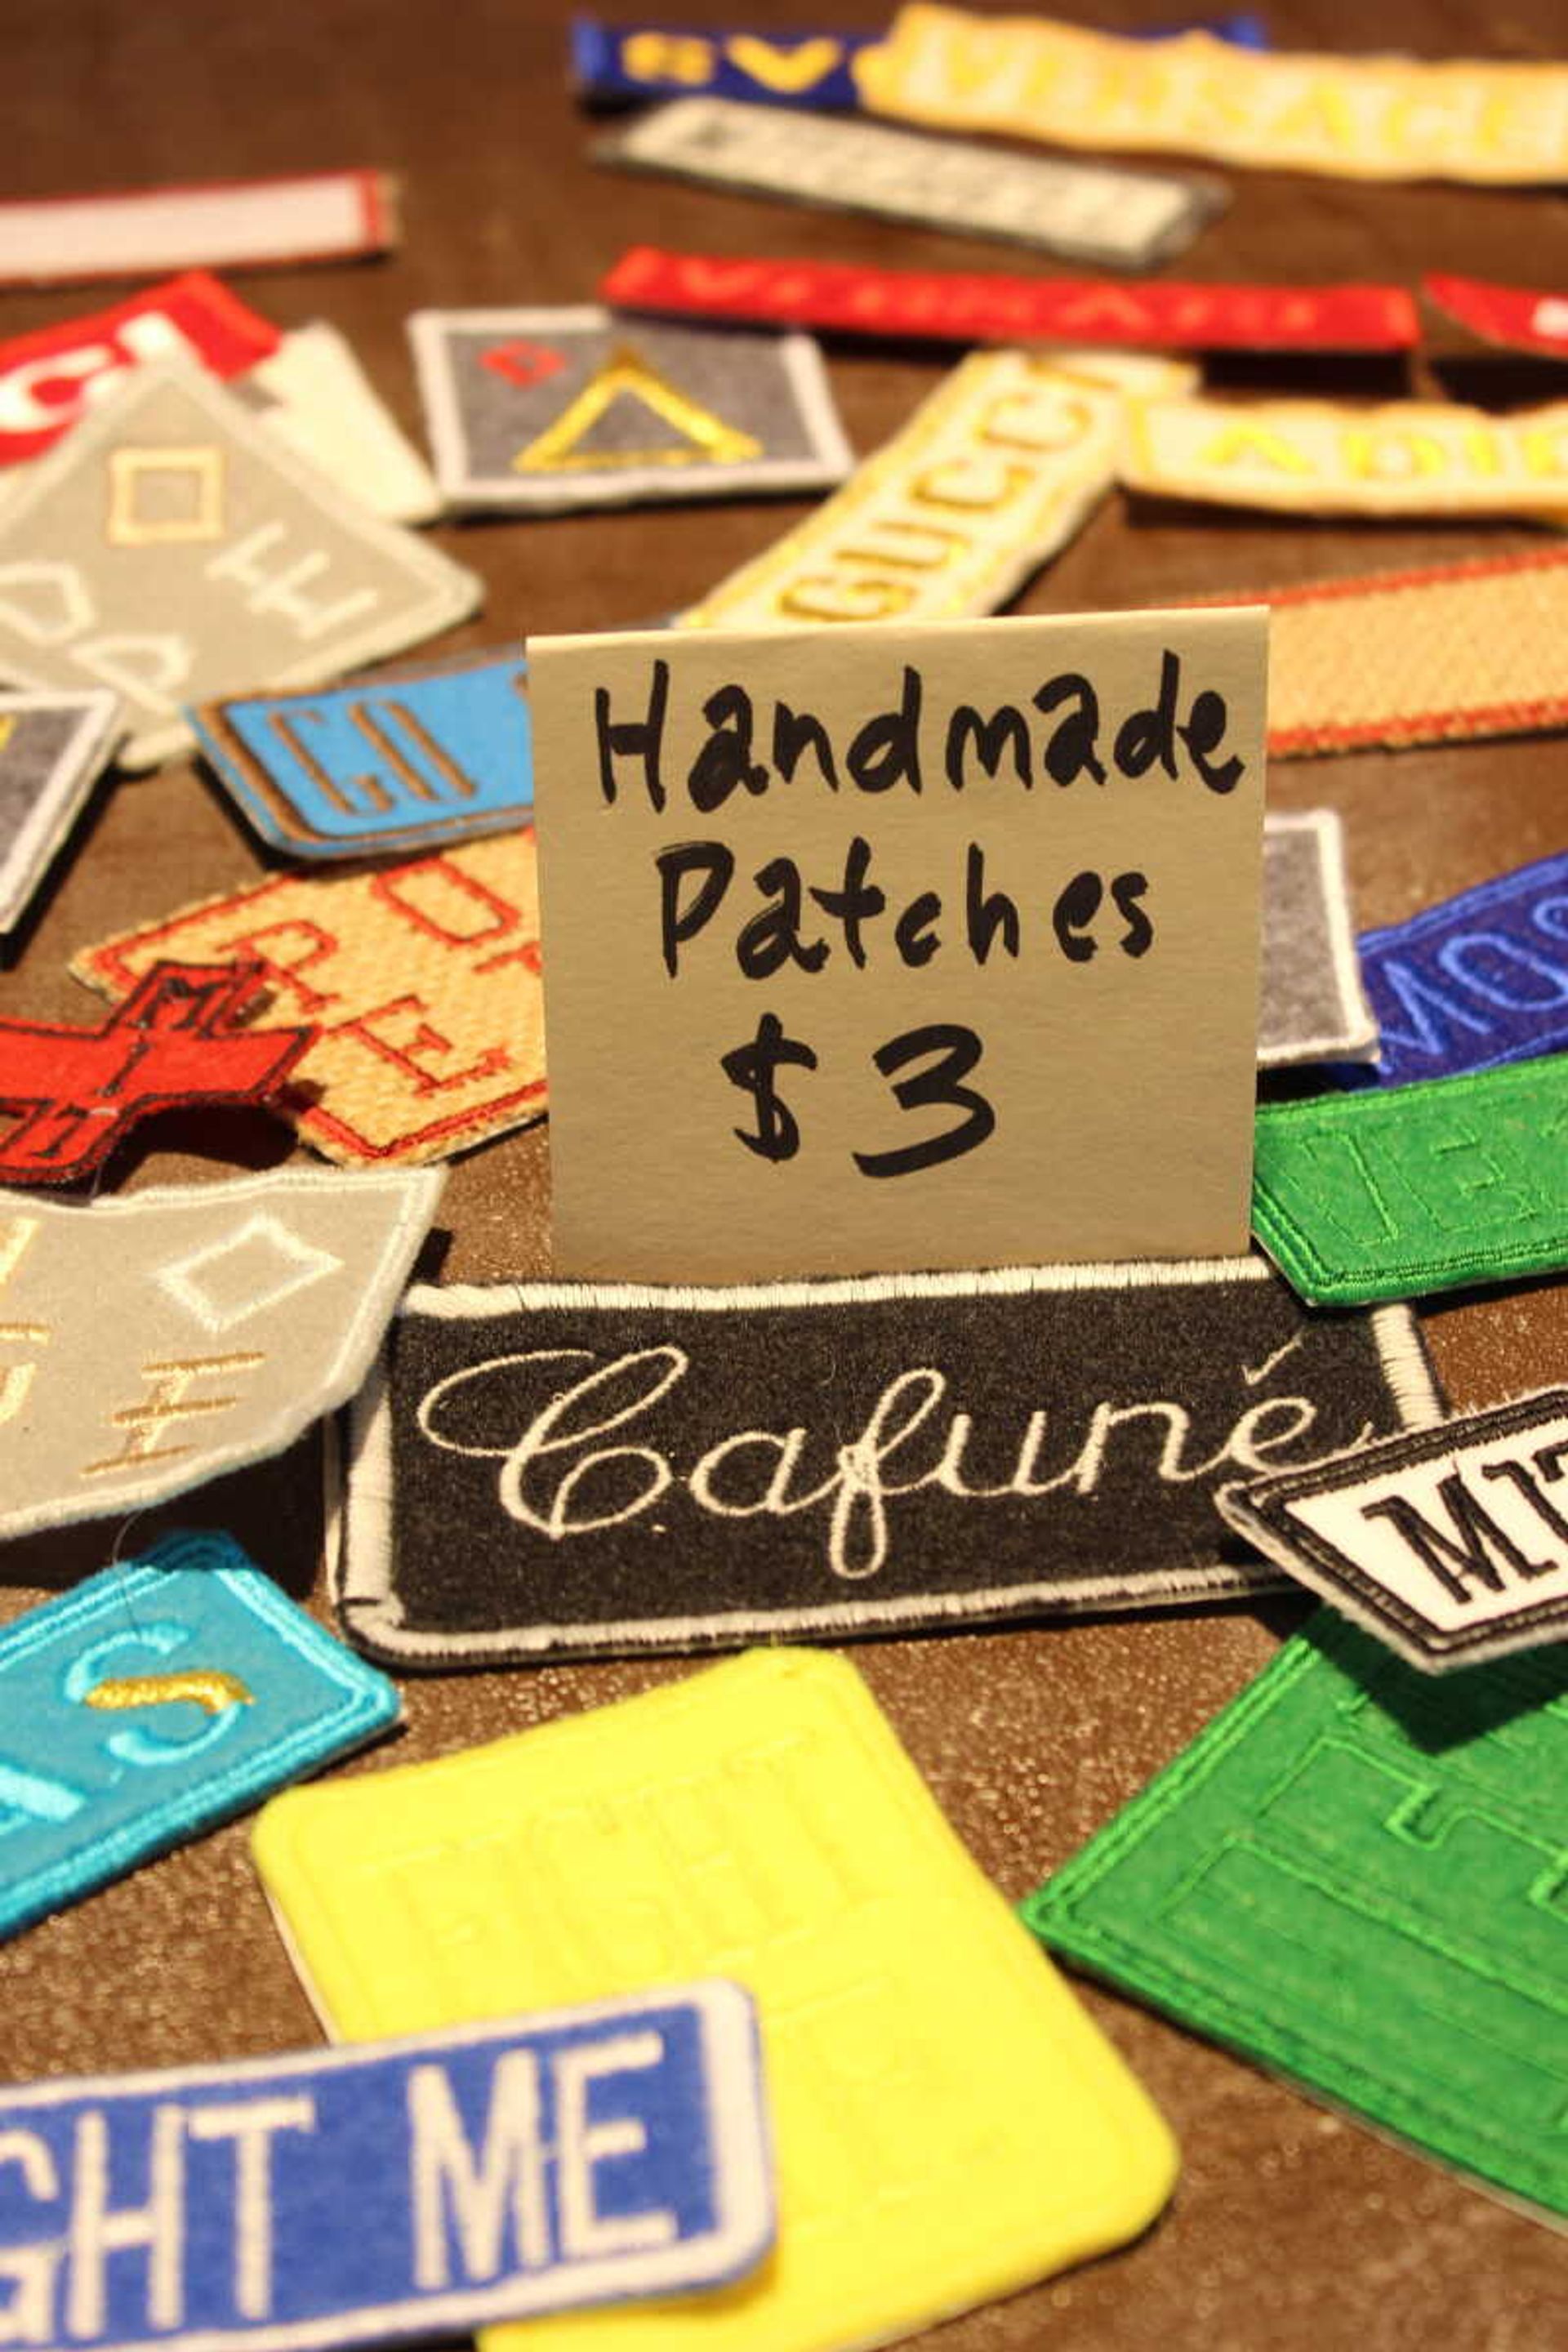 Handmade patches for sale at Southeast’s Art Guild Annual Show and Sale on Nov. 16.